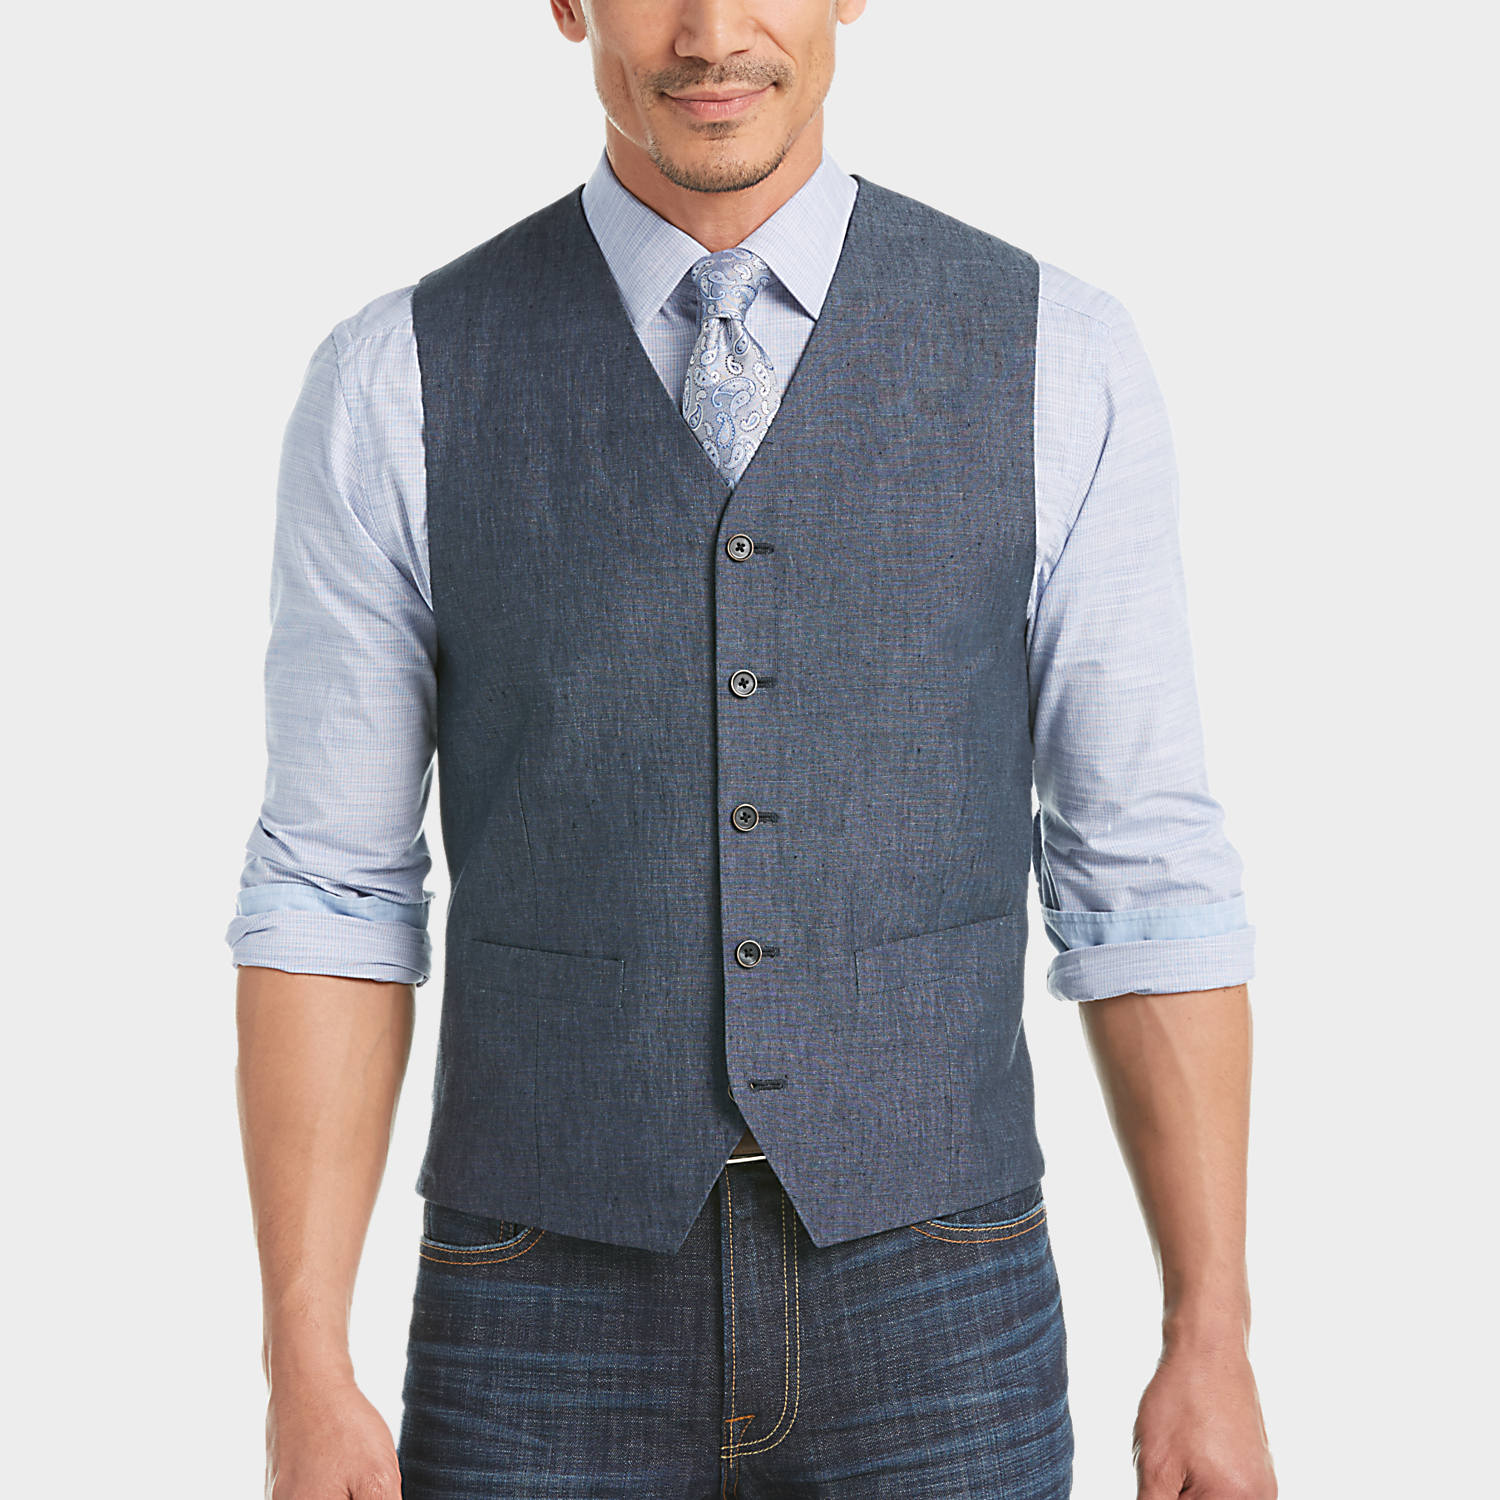 vest for men see stylist-approved outfits for this item jiewops